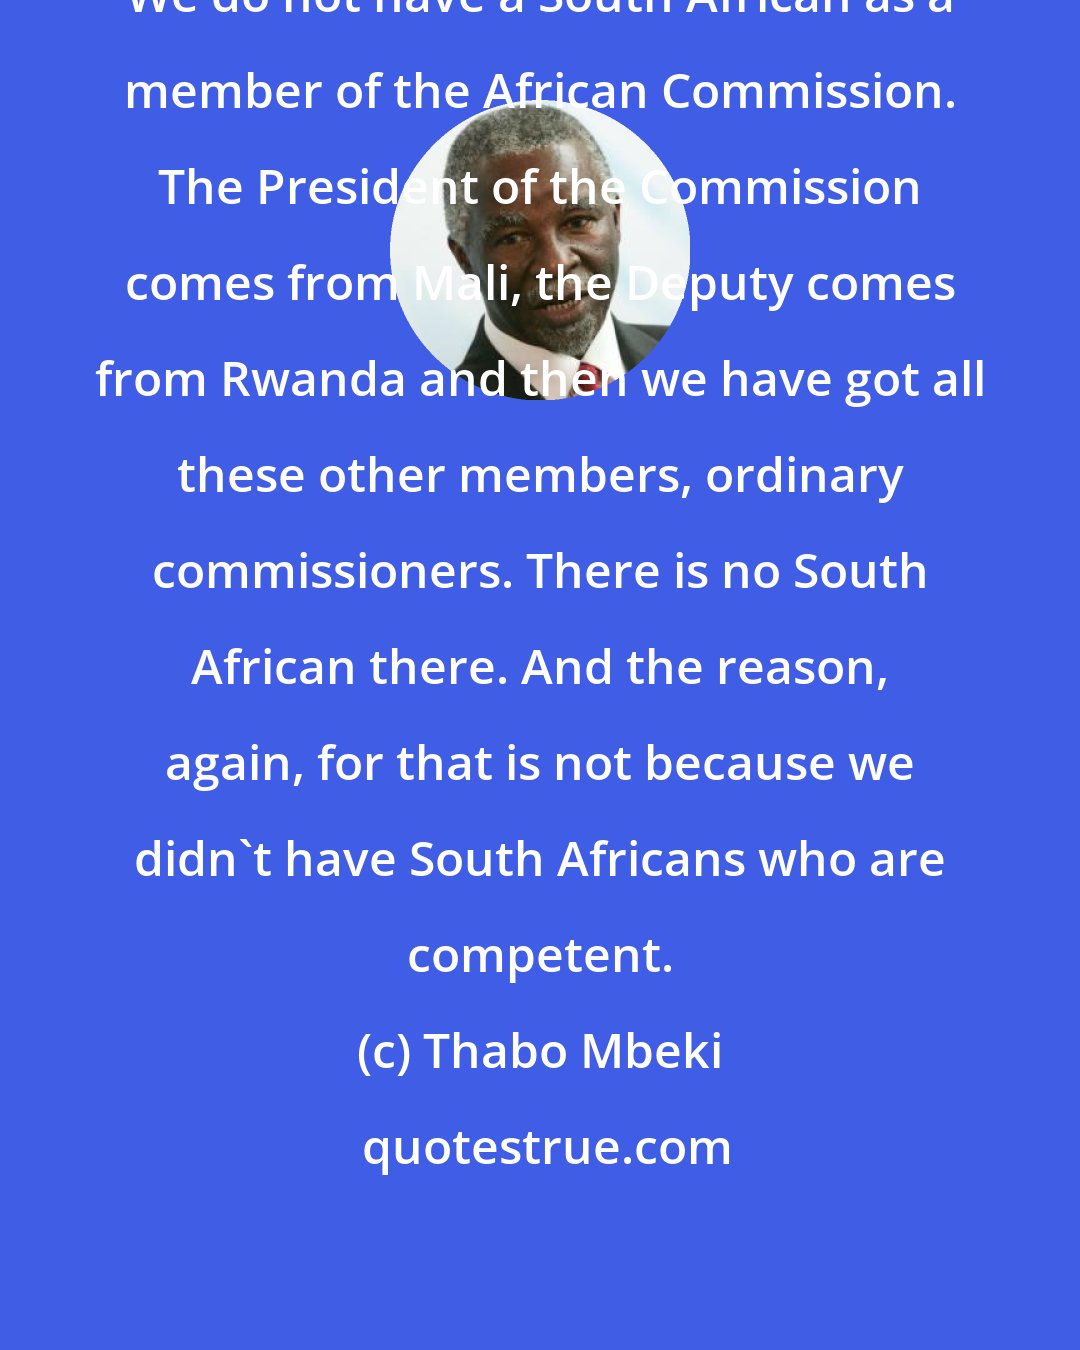 Thabo Mbeki: We do not have a South African as a member of the African Commission. The President of the Commission comes from Mali, the Deputy comes from Rwanda and then we have got all these other members, ordinary commissioners. There is no South African there. And the reason, again, for that is not because we didn't have South Africans who are competent.